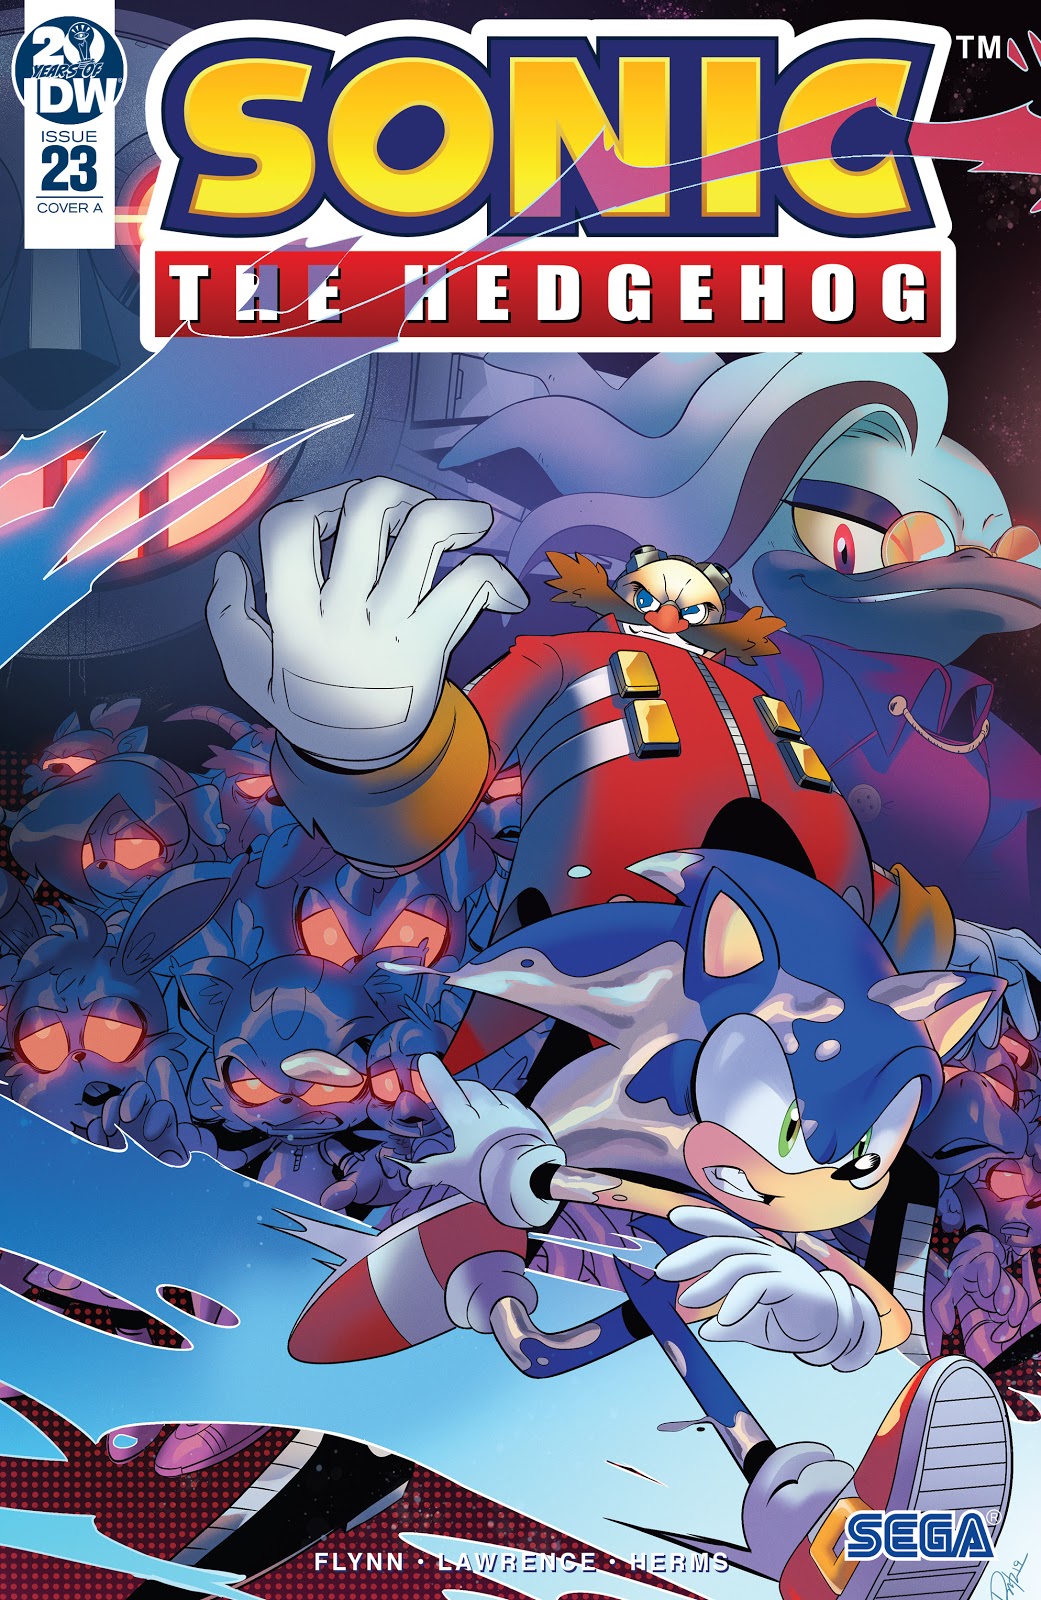 Hedgehogs Can't Swim: REVIEW: Sonic the Hedgehog (2020)